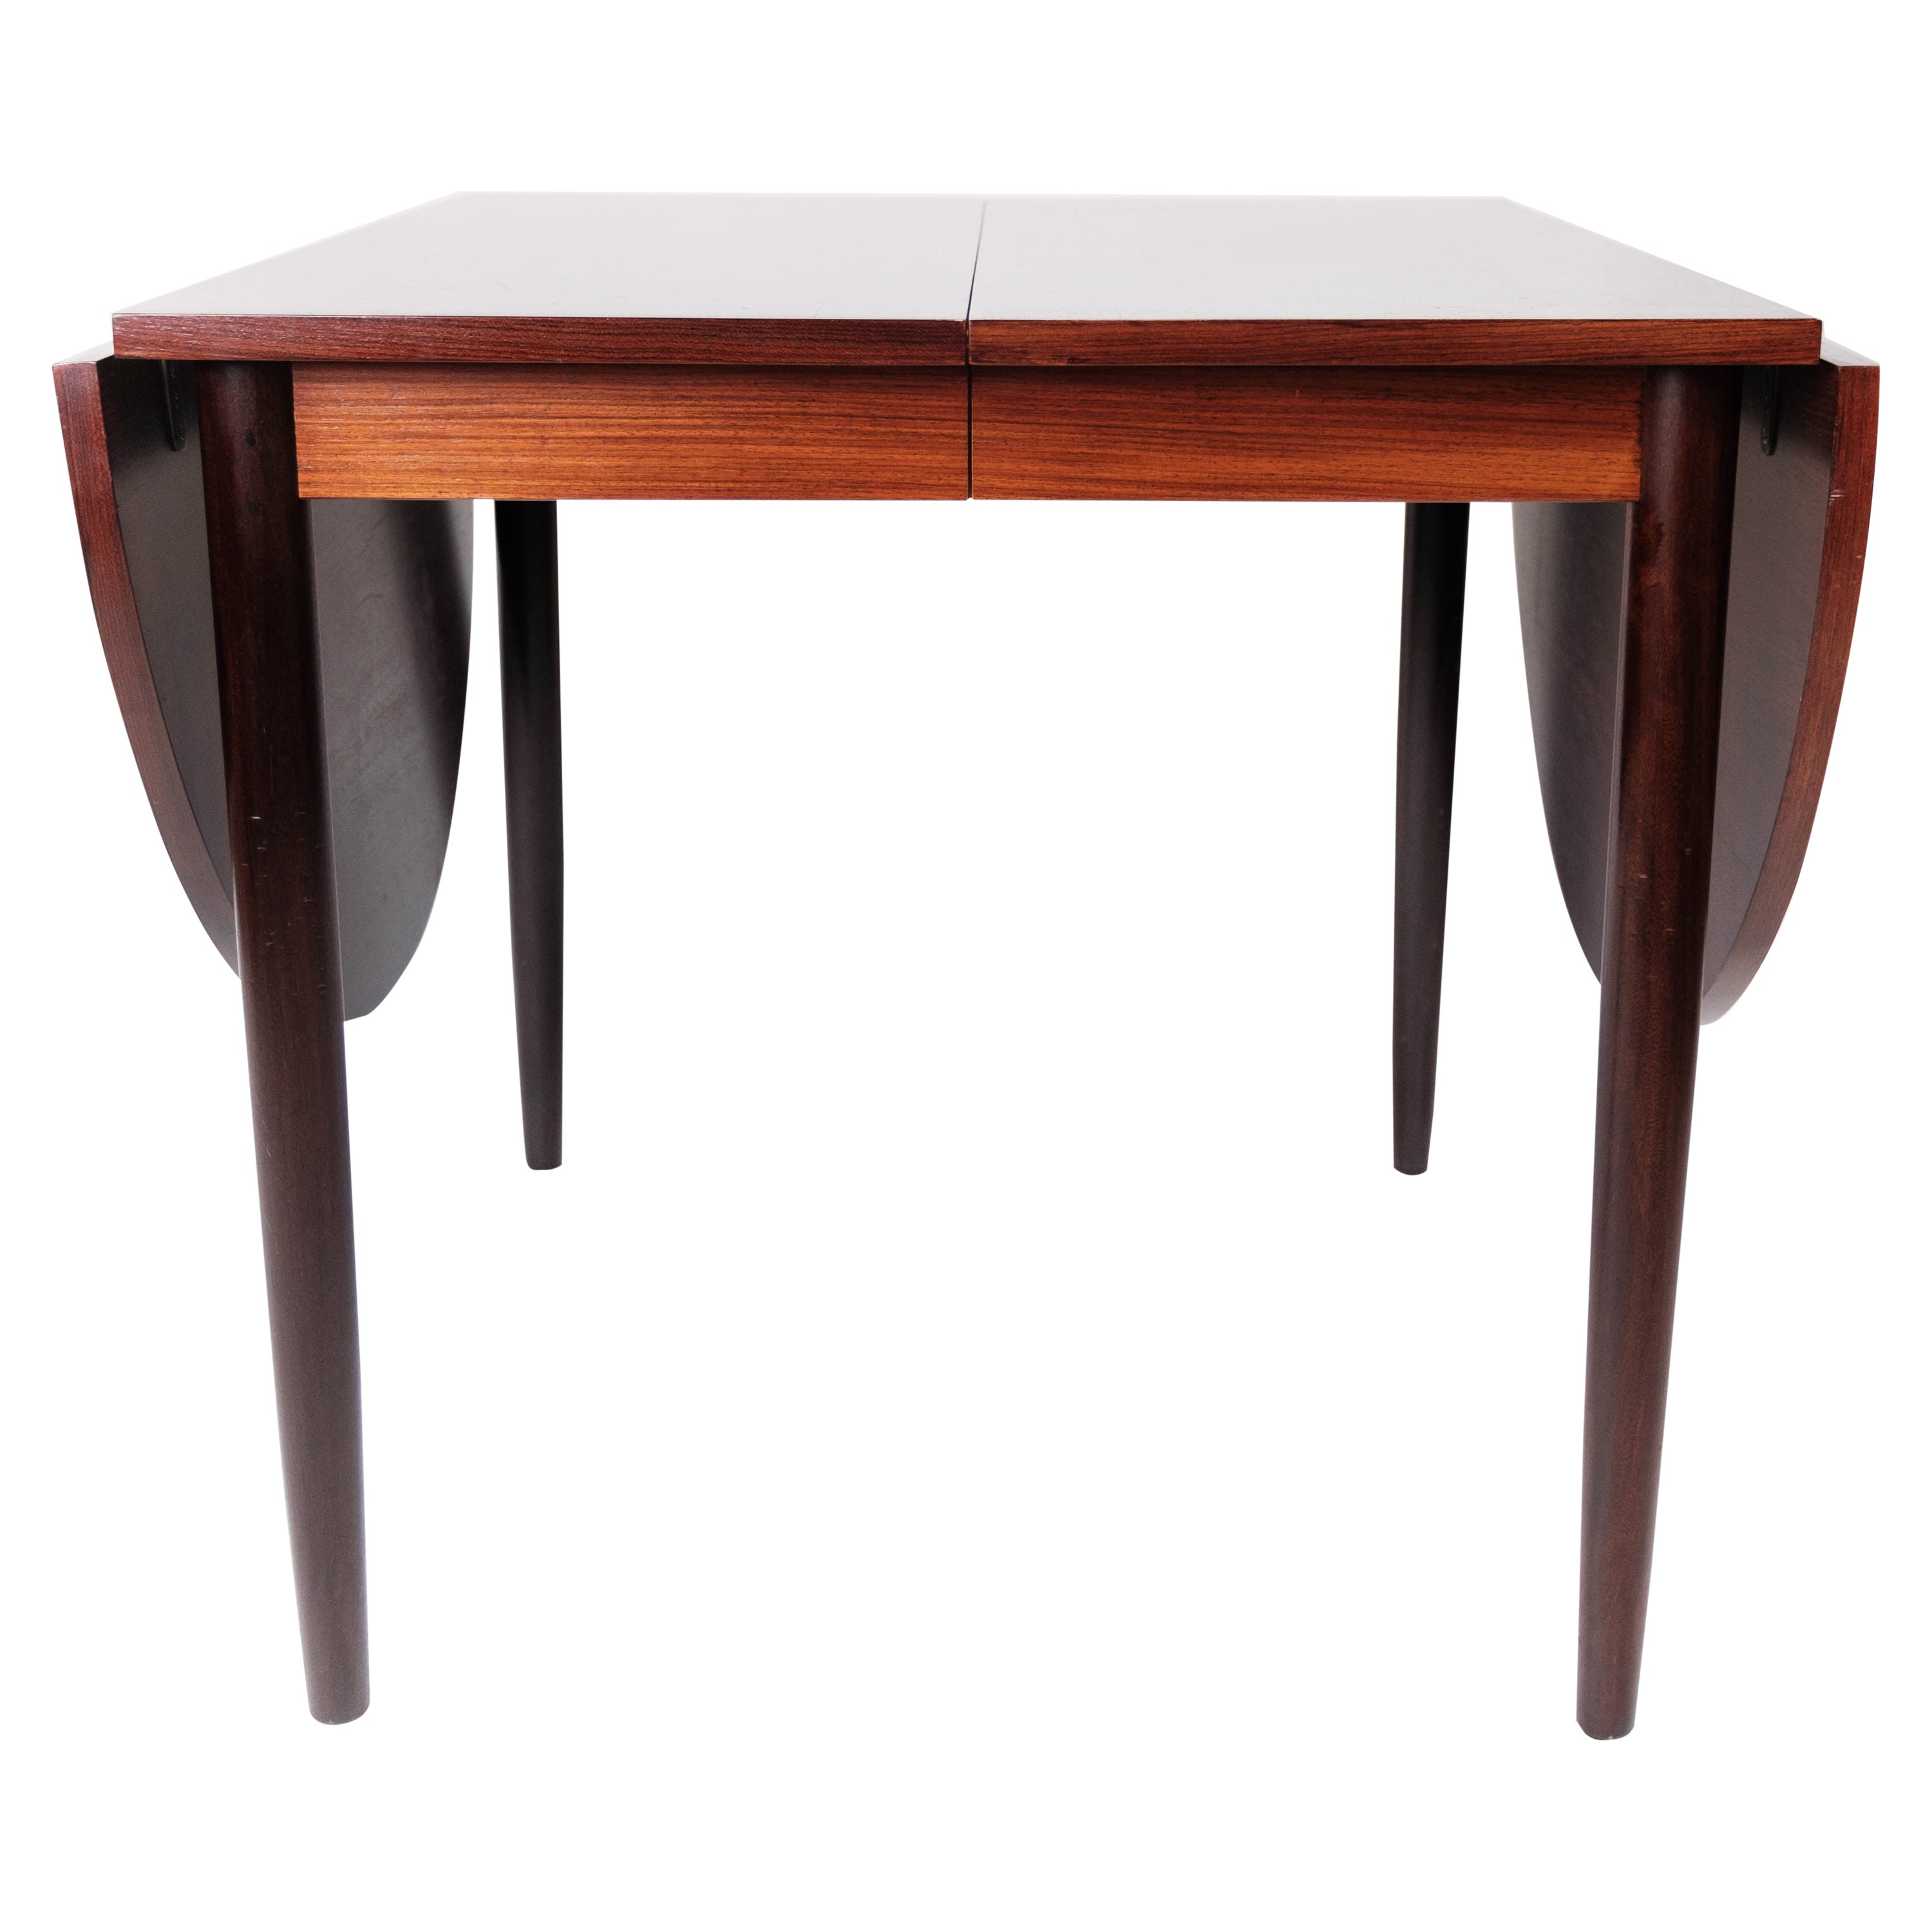 Dining Table Made In Rosewood With Extension Plates By Arne Vodder From 1960s For Sale